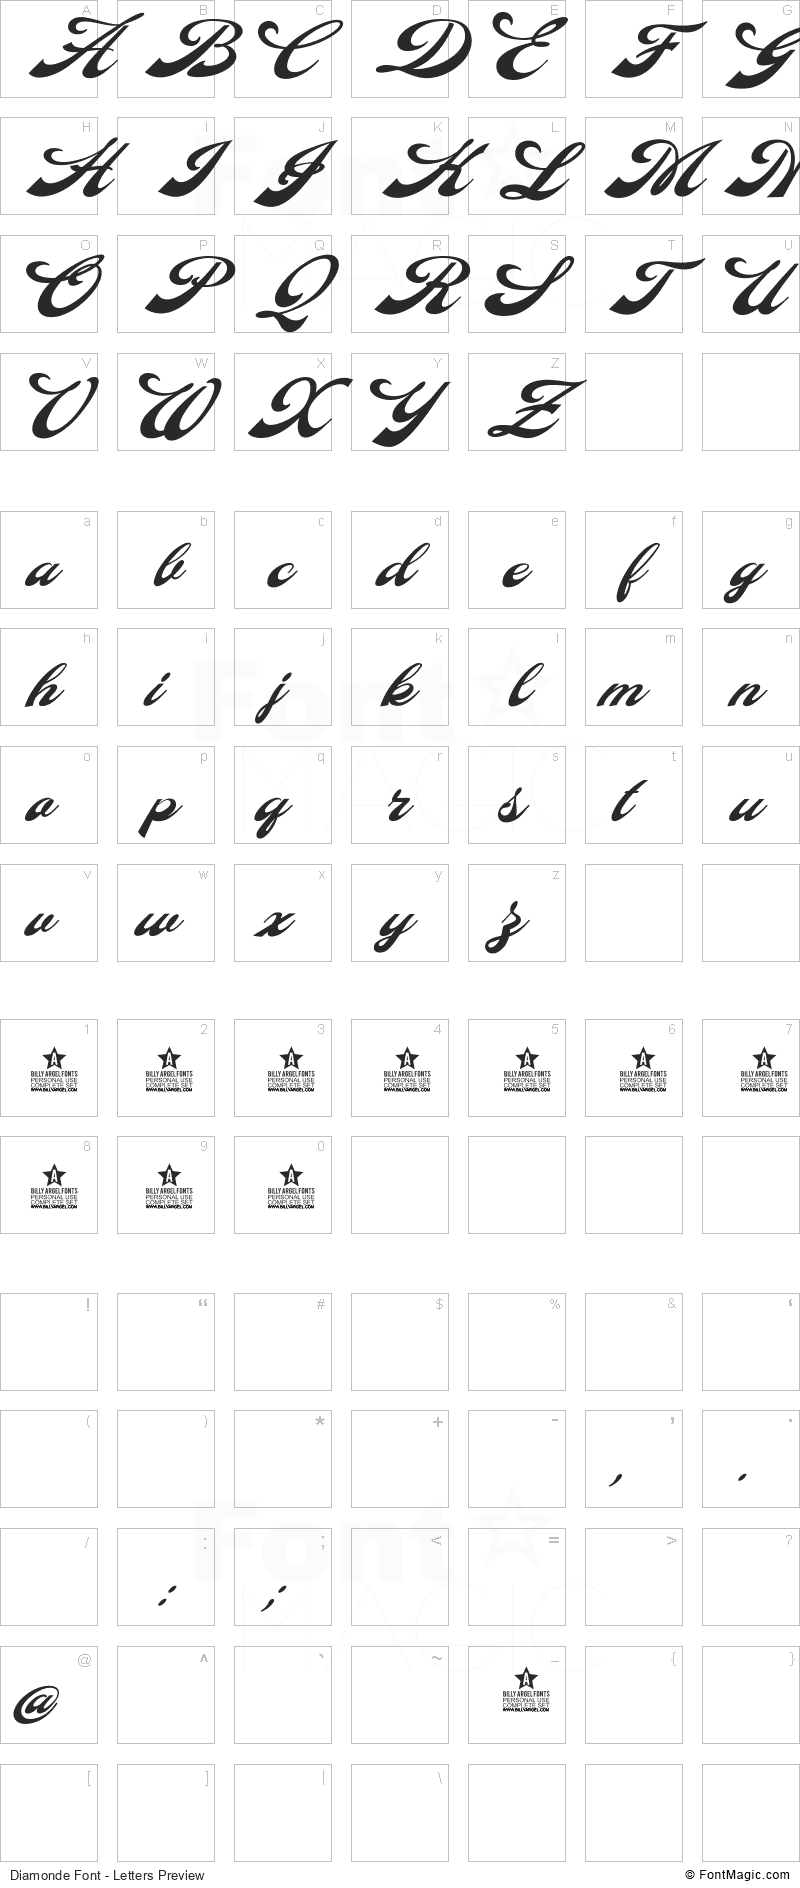 Diamonde Font - All Latters Preview Chart